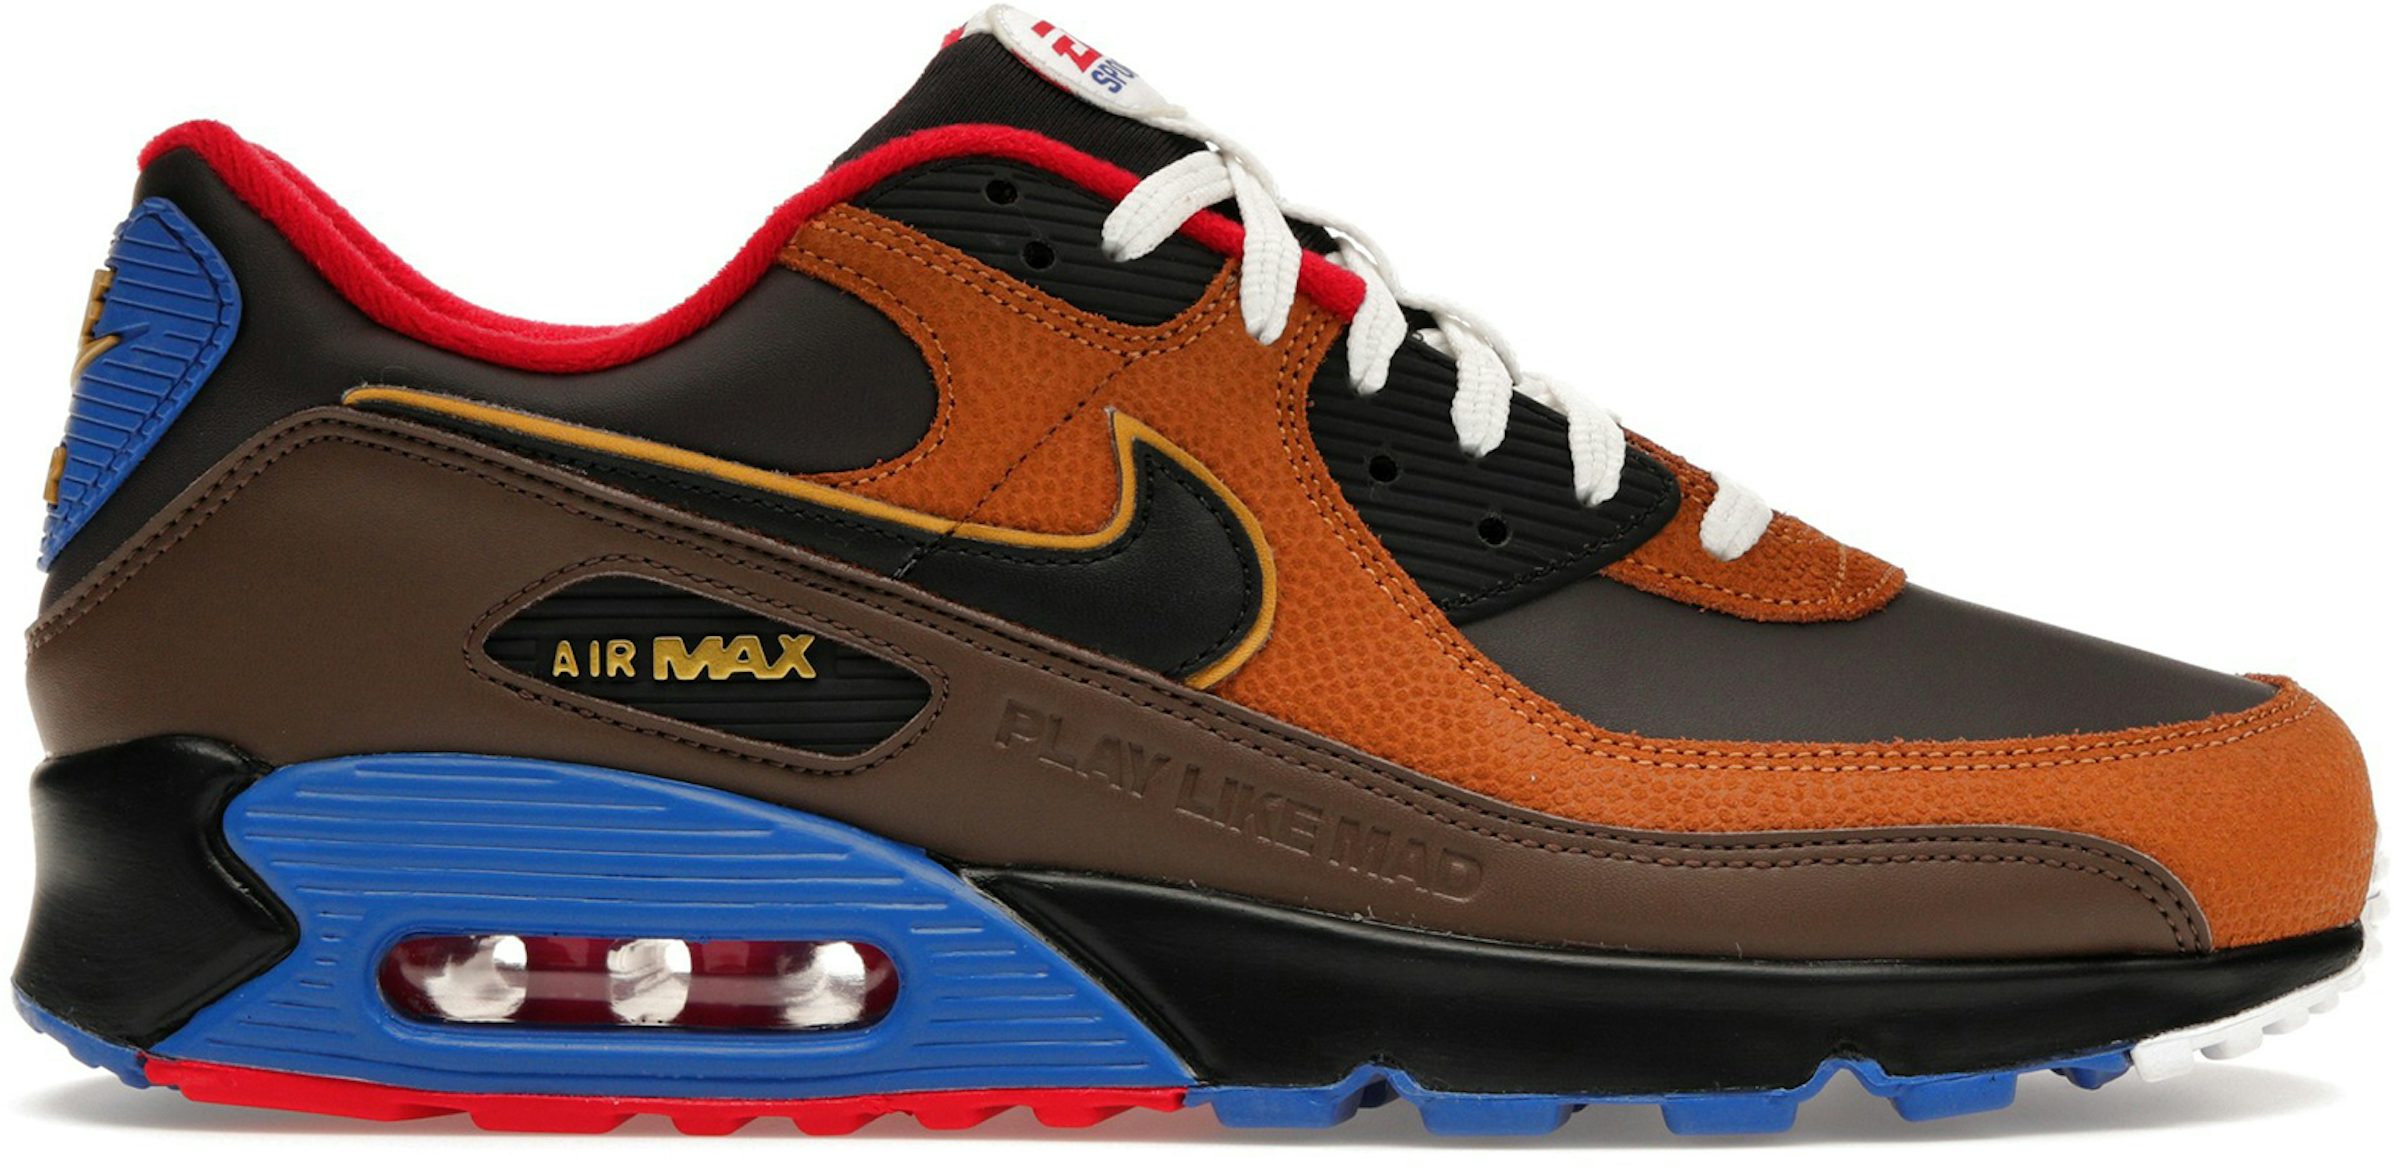 https://images.stockx.com/images/Nike-Air-Max-90-EA-Sports-Play-Like-Mad-Product.jpg?fit=fill&bg=FFFFFF&w=1200&h=857&fm=jpg&auto=compress&dpr=2&trim=color&updated_at=1694204604&q=60